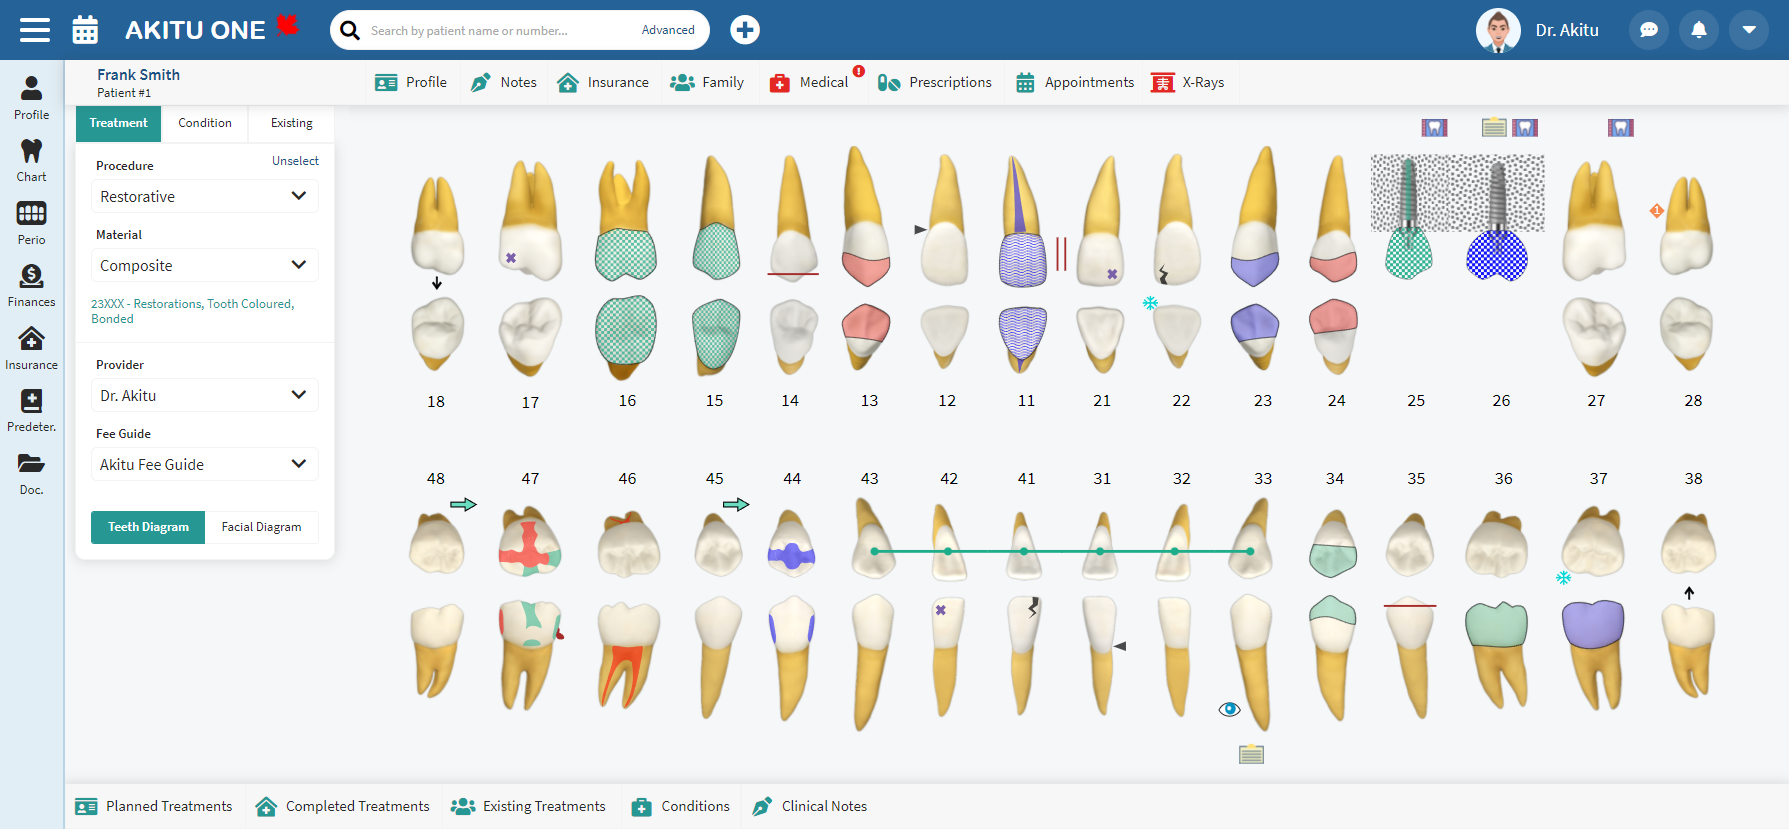 Teeth Charting with Akitu One is more easy and comprehensive.